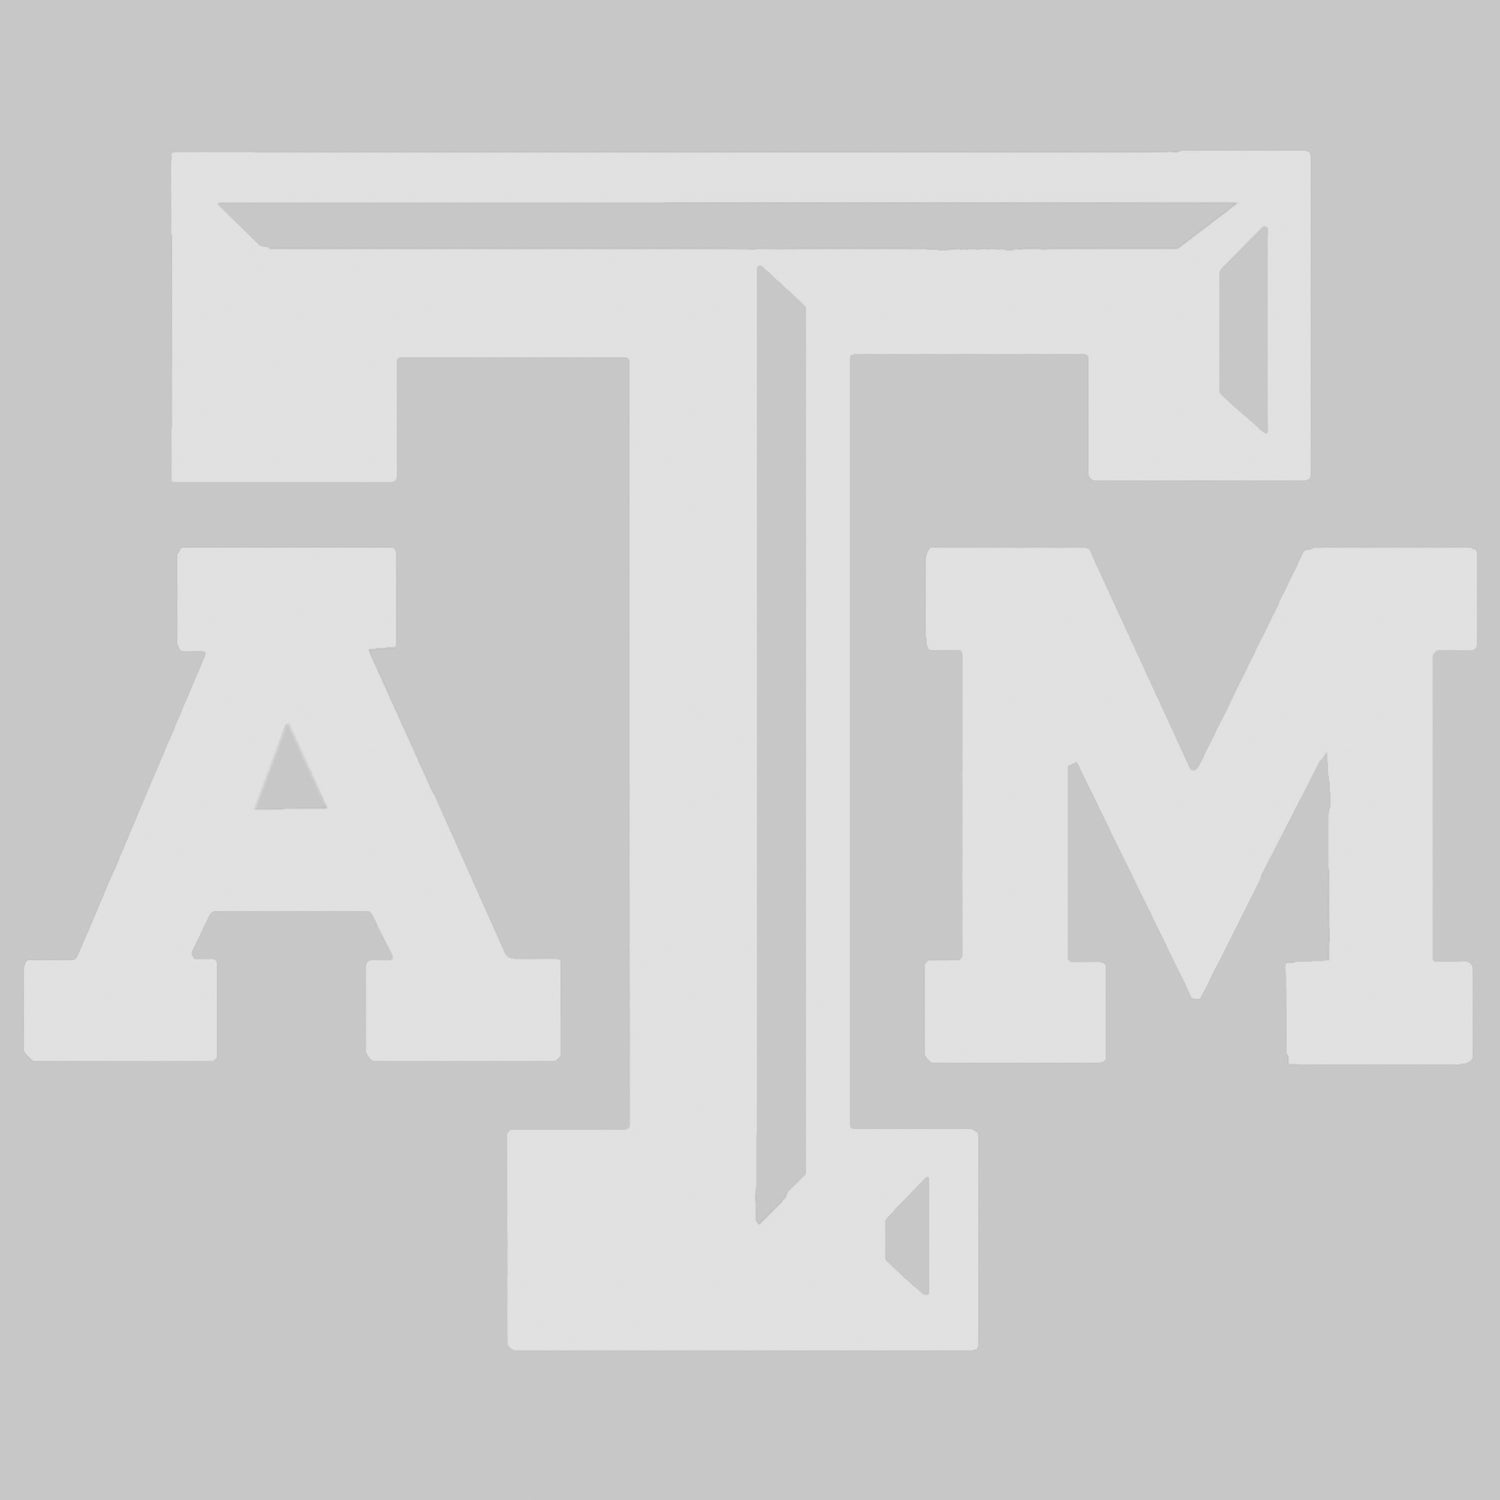 Texas A&M Frosted Glass Beveled ATM Decal